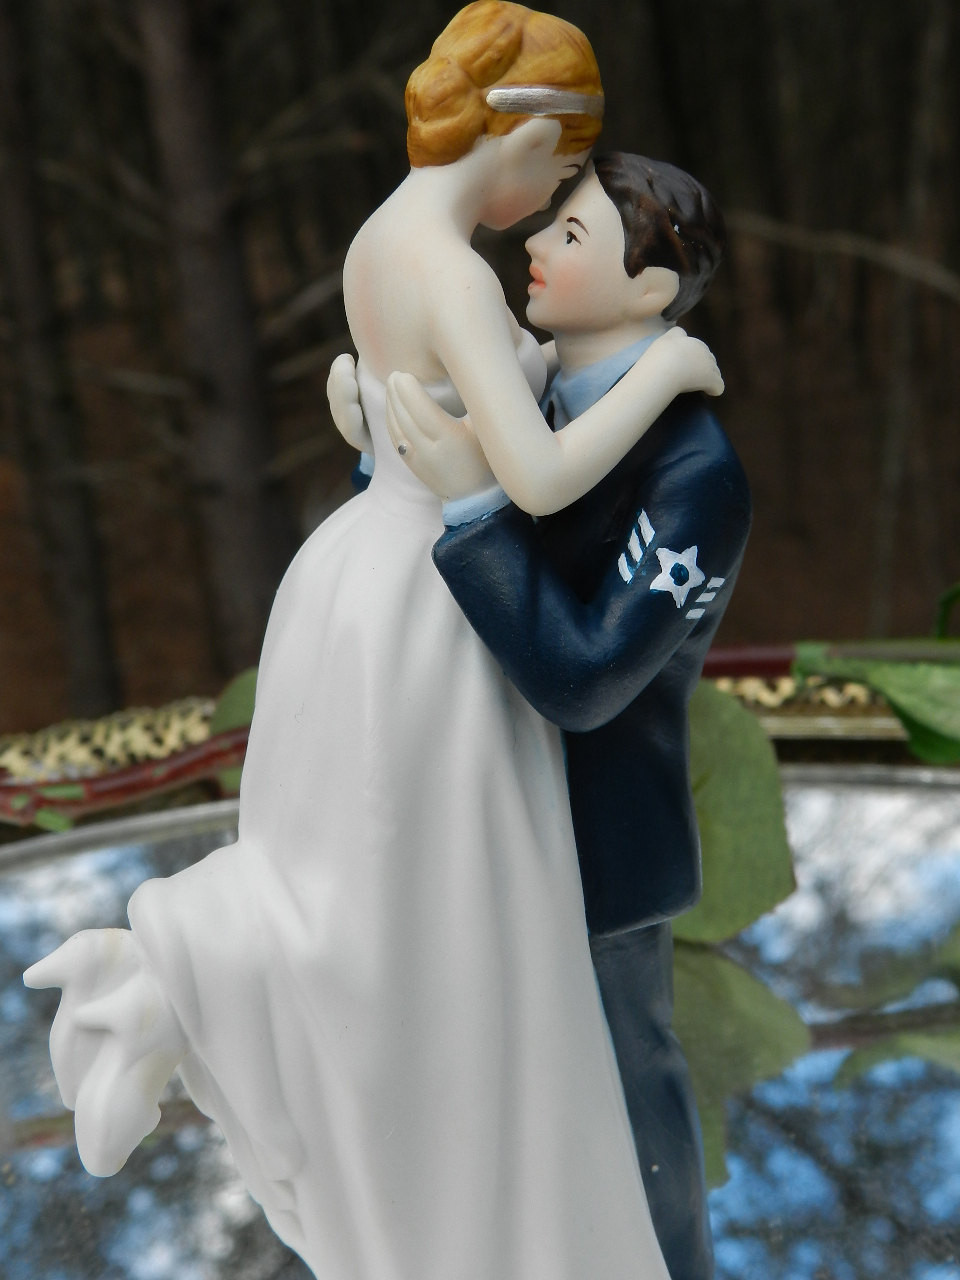 Military Wedding Cake Toppers
 Items similar to Military Air Force Airman Wedding Cake